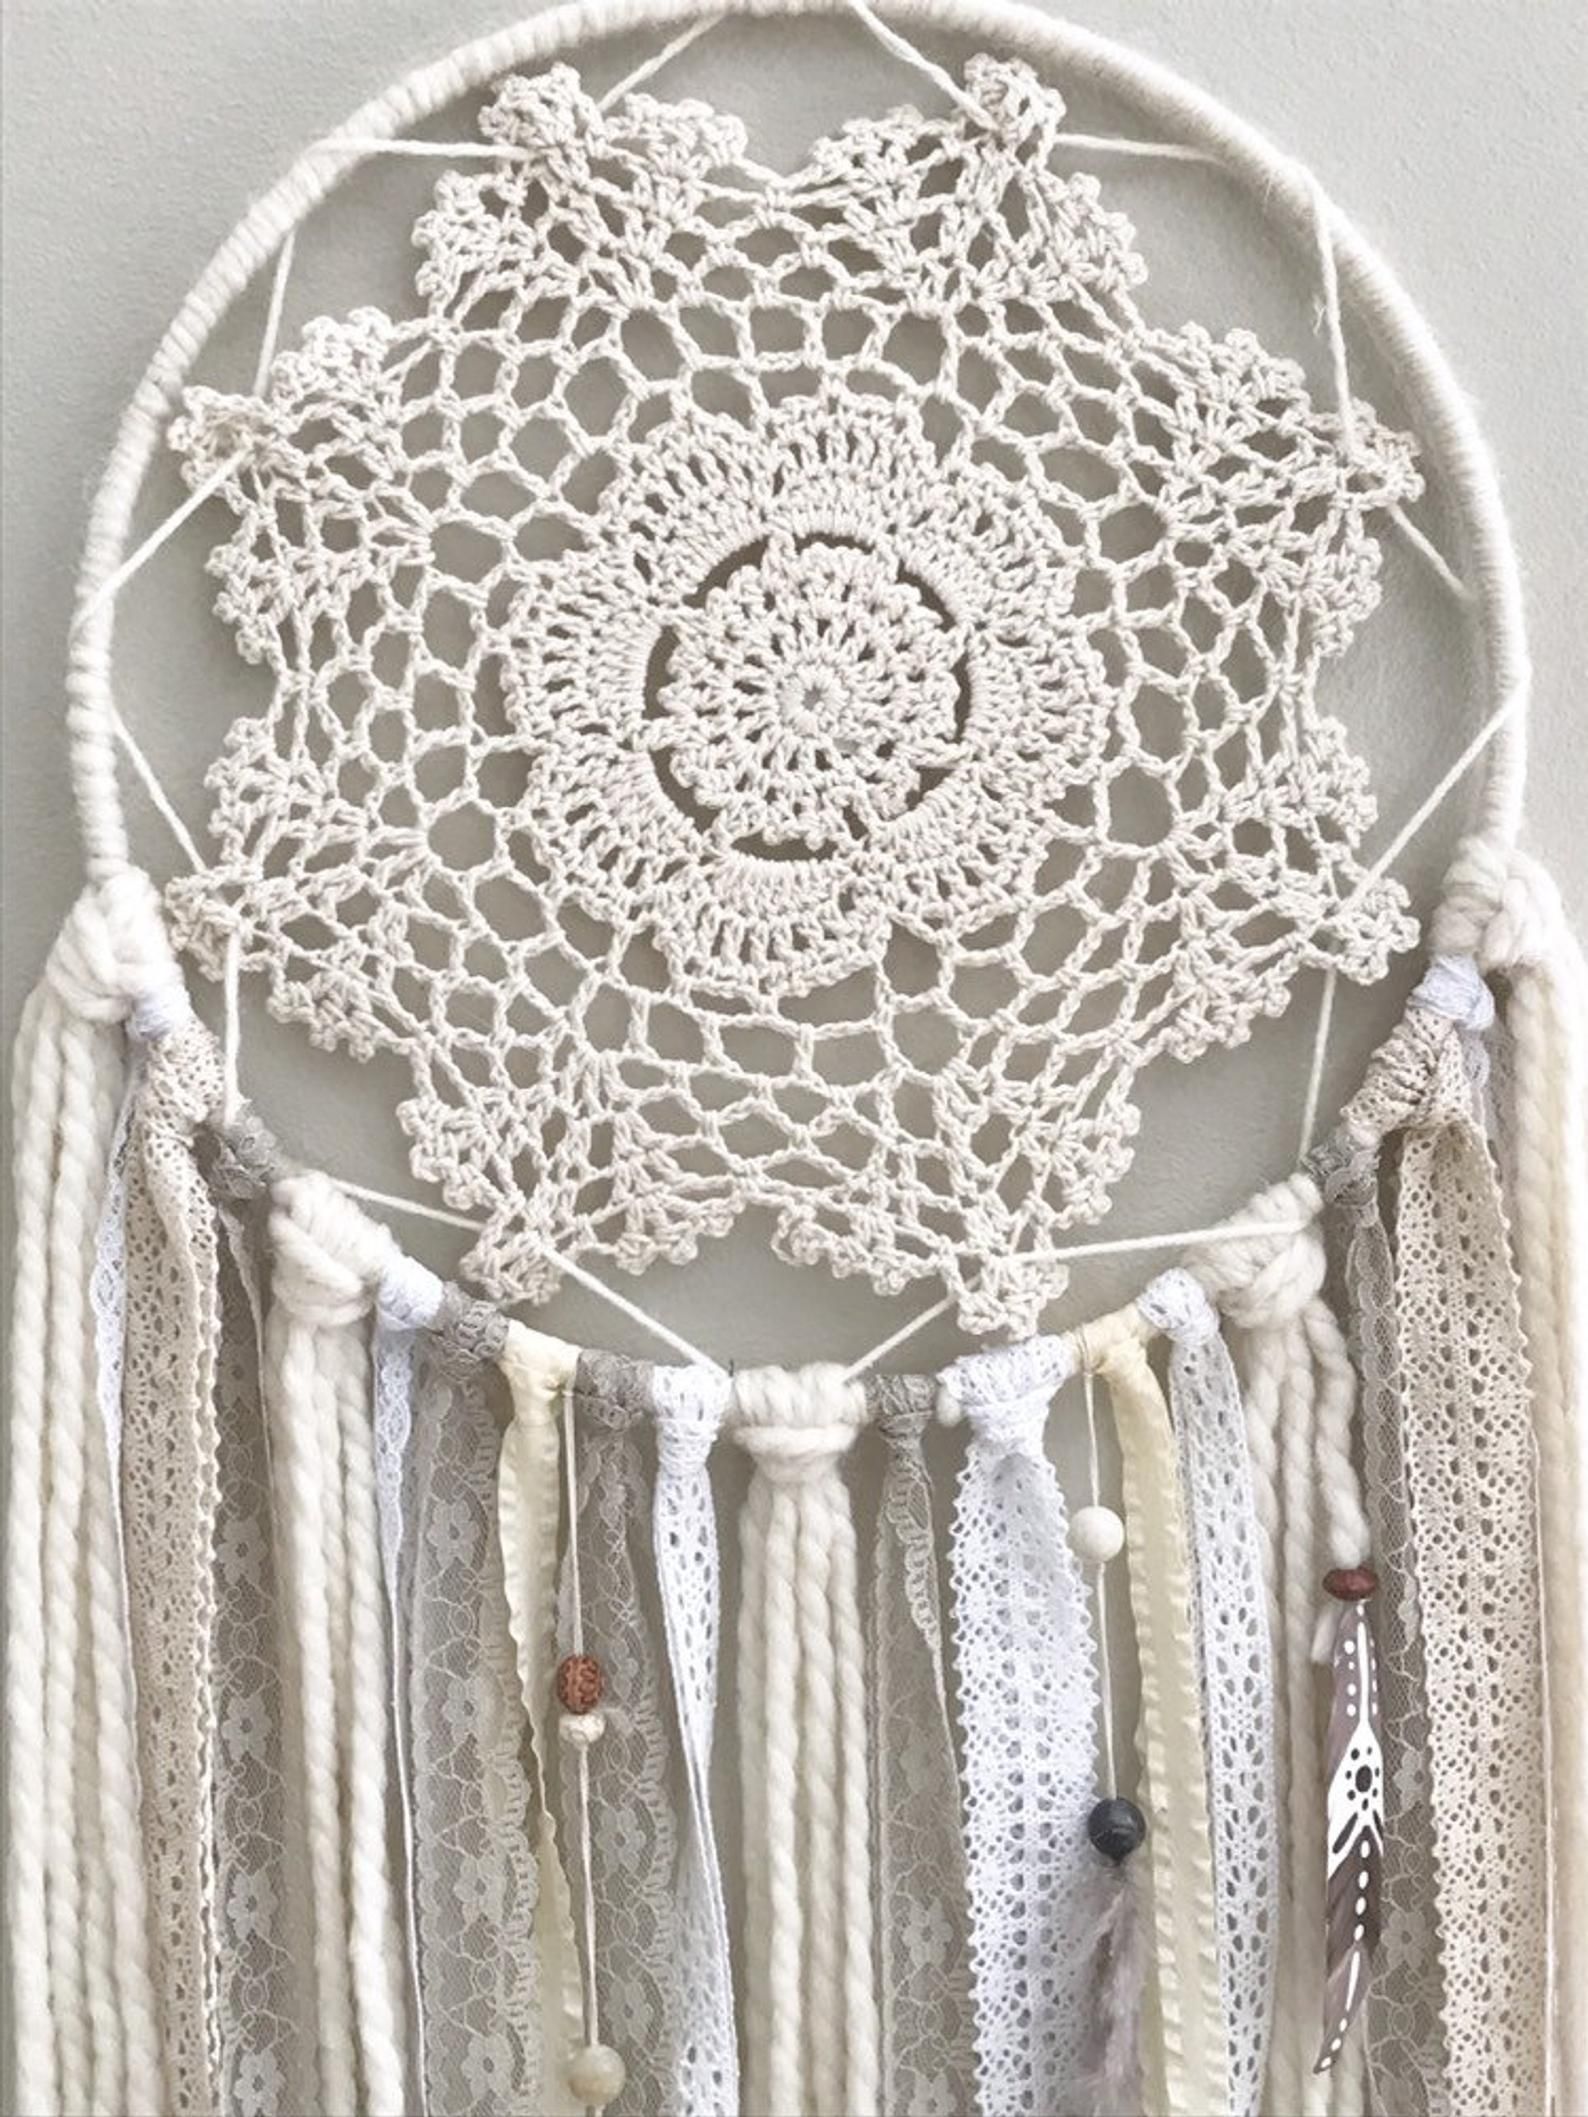 Large Dream Catcher, Dream Catcher Wall Hanging, Boho Home Decor, Teen Girl Gifts, - Large Dream Catcher, Dream Catcher Wall Hanging, Boho Home Decor, Teen Girl Gifts, -   18 diy Dream Catcher chandelier ideas